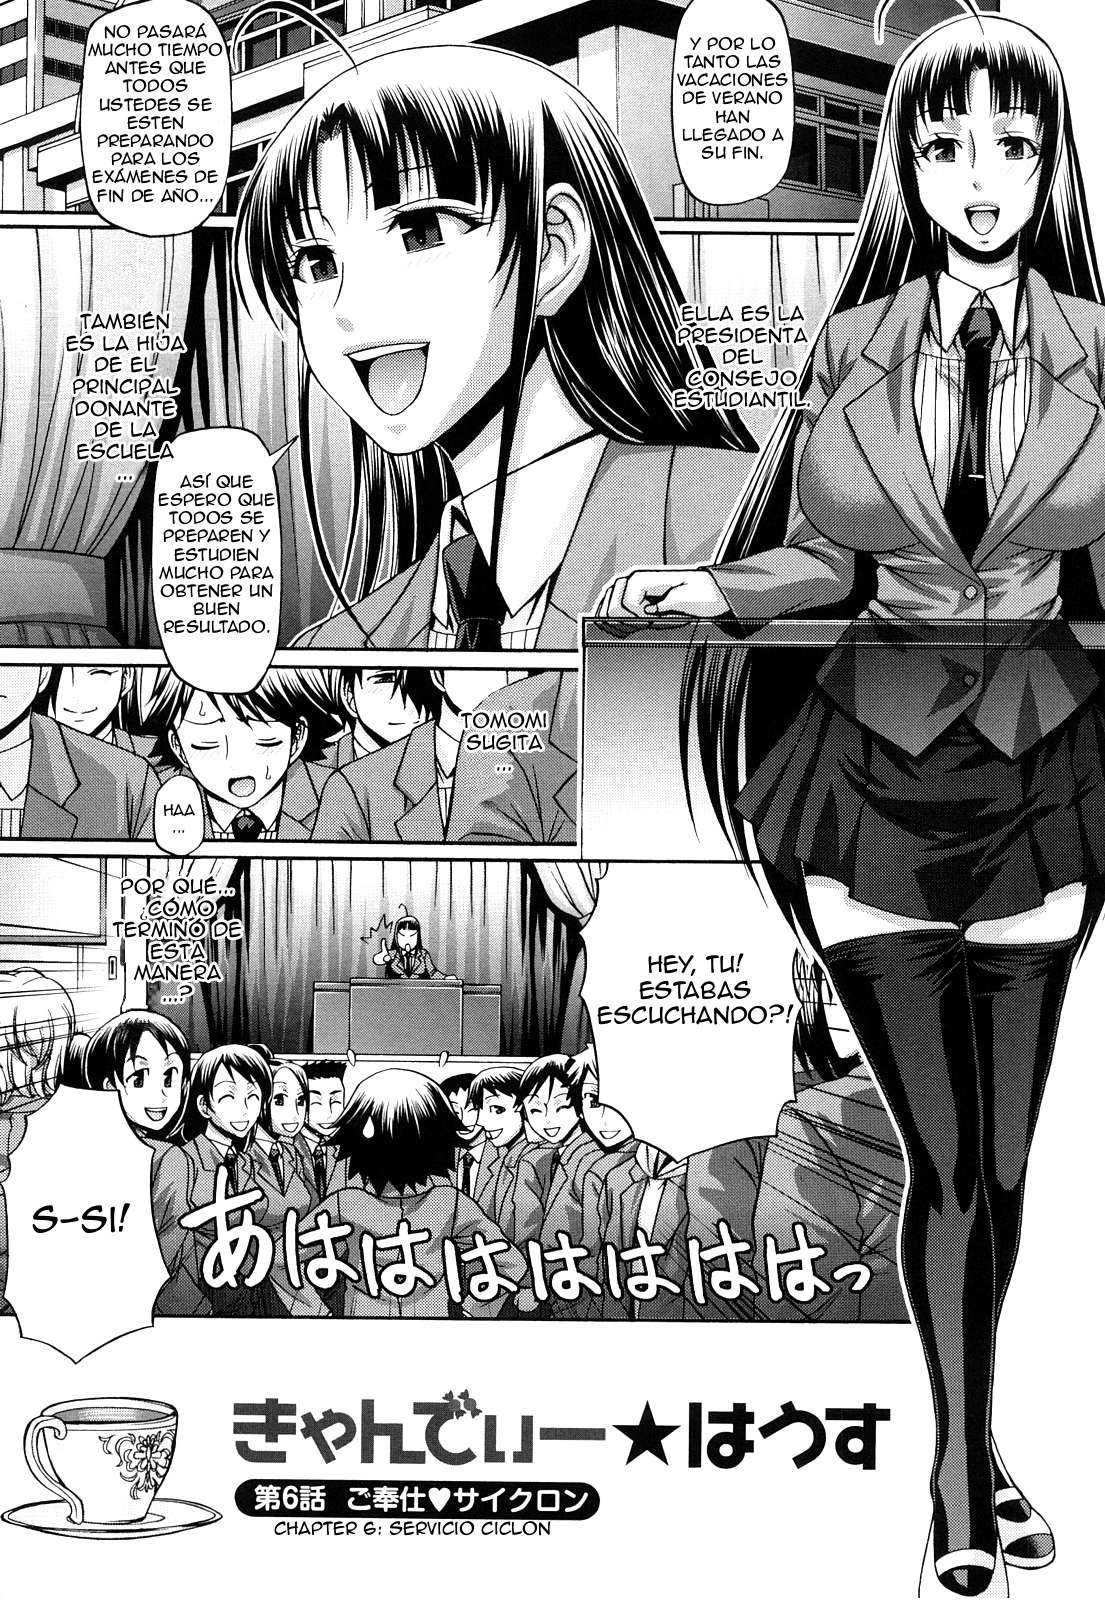 Candy House Sin Censura Chapter-6 - 0